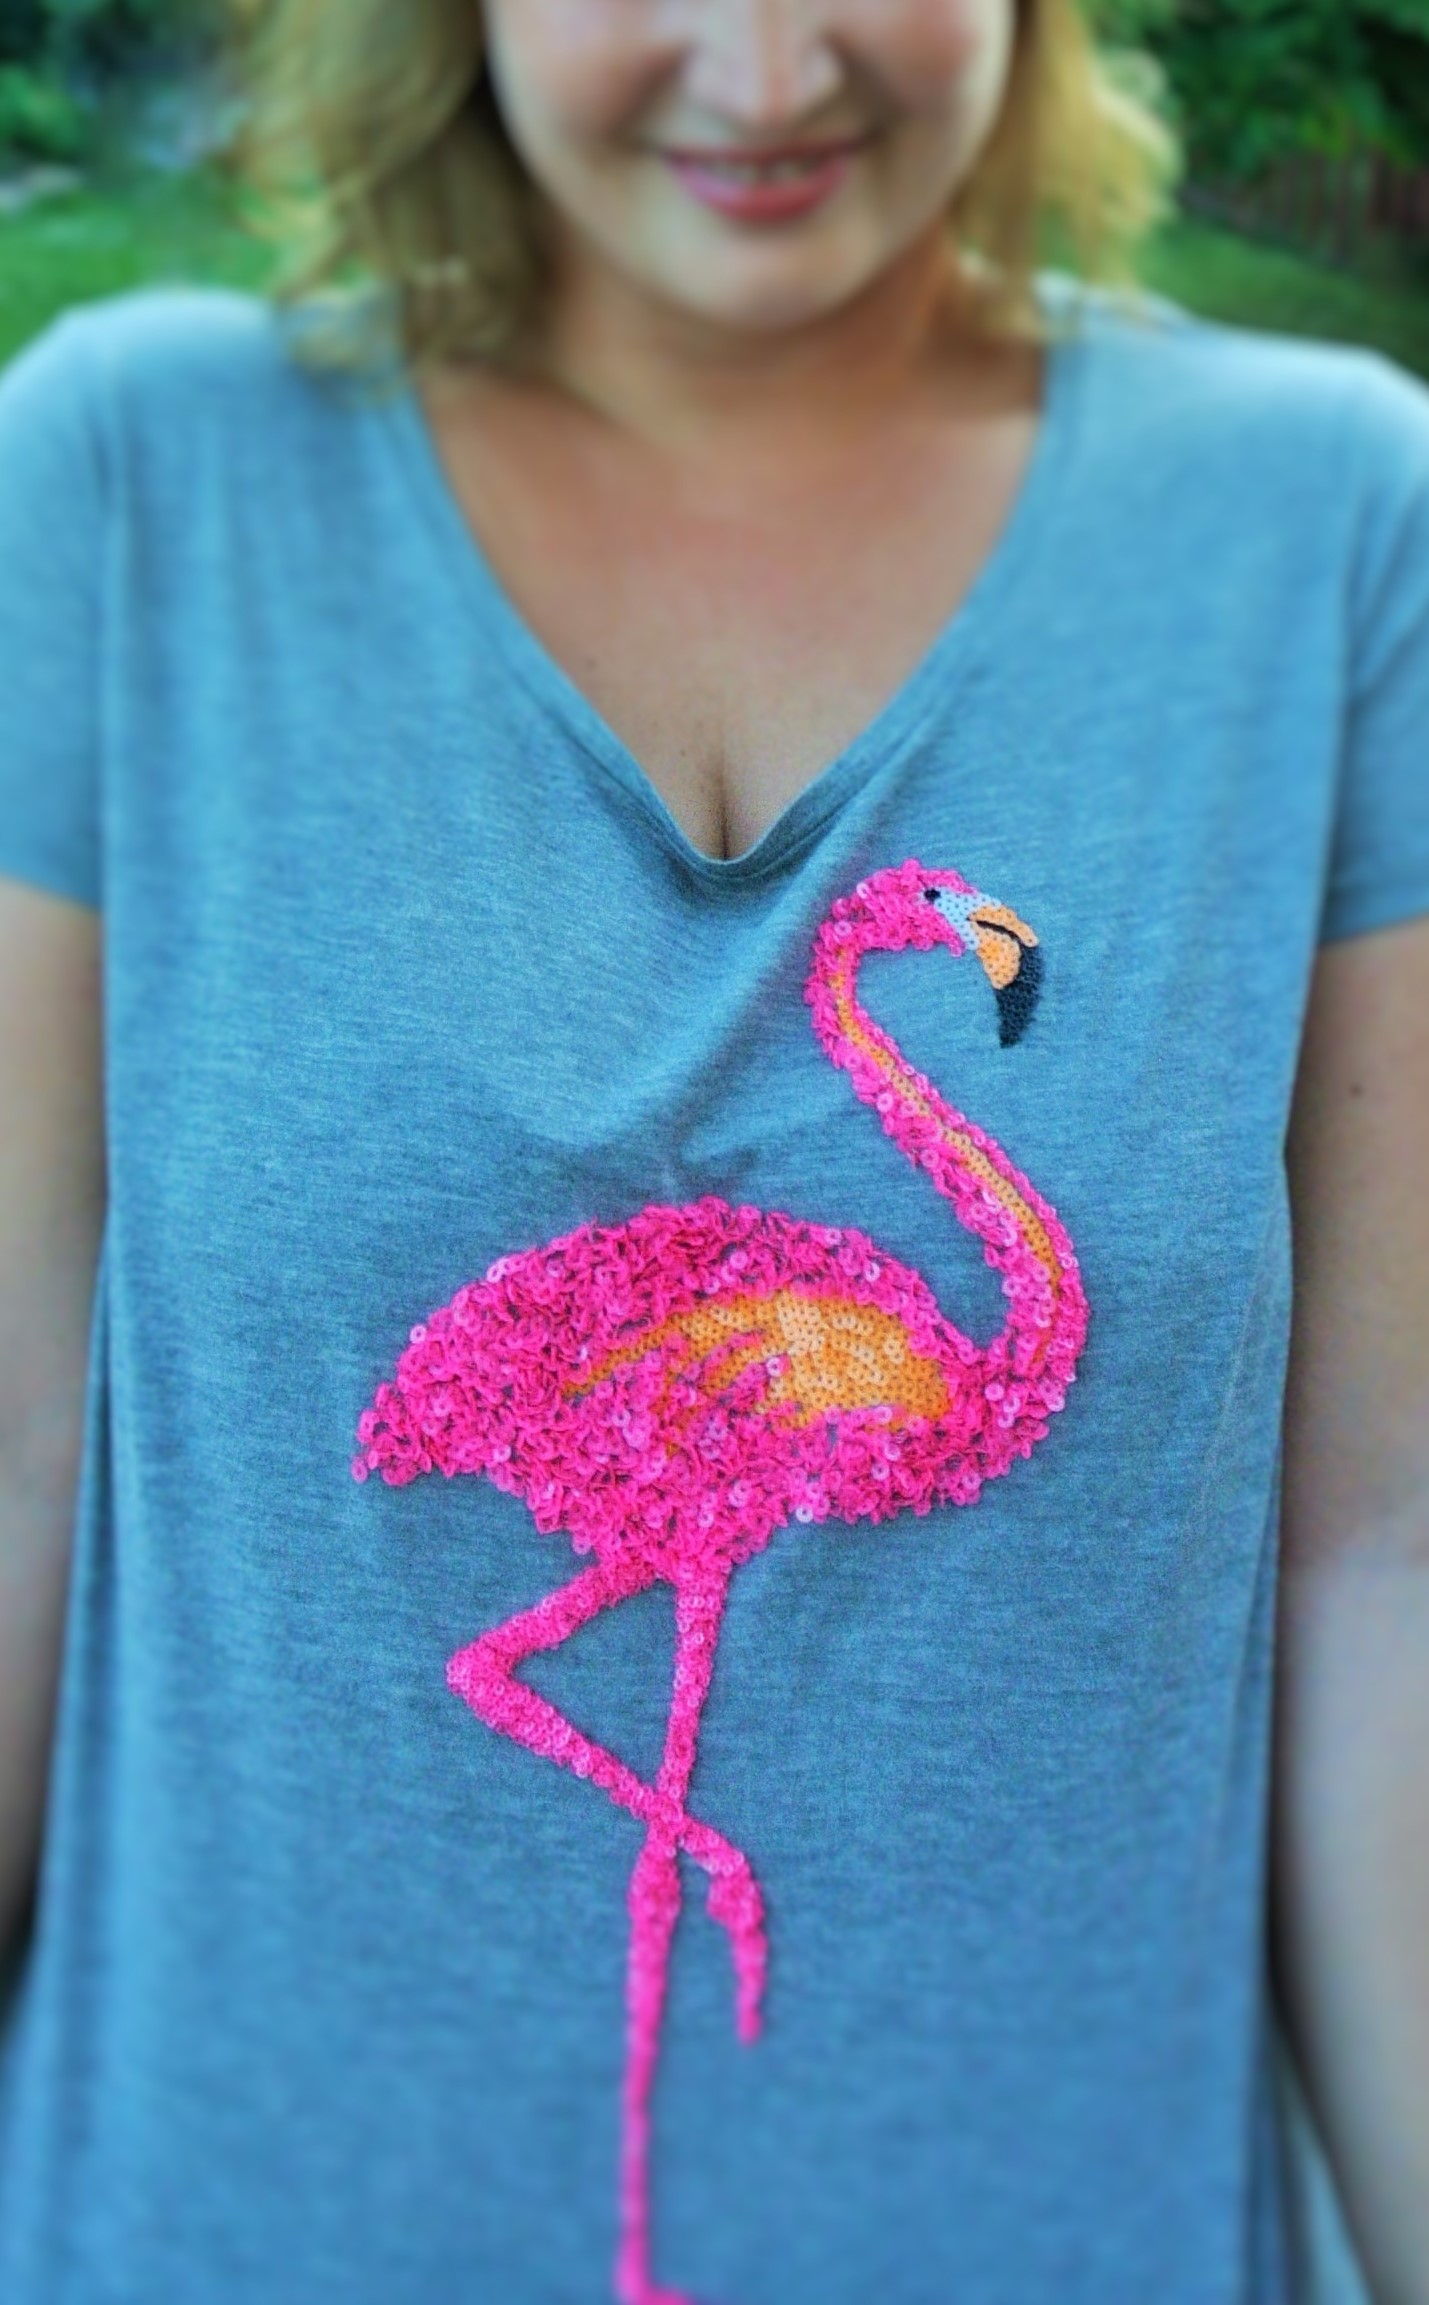 Flamingo in pink: Mein CURVY-Outfit